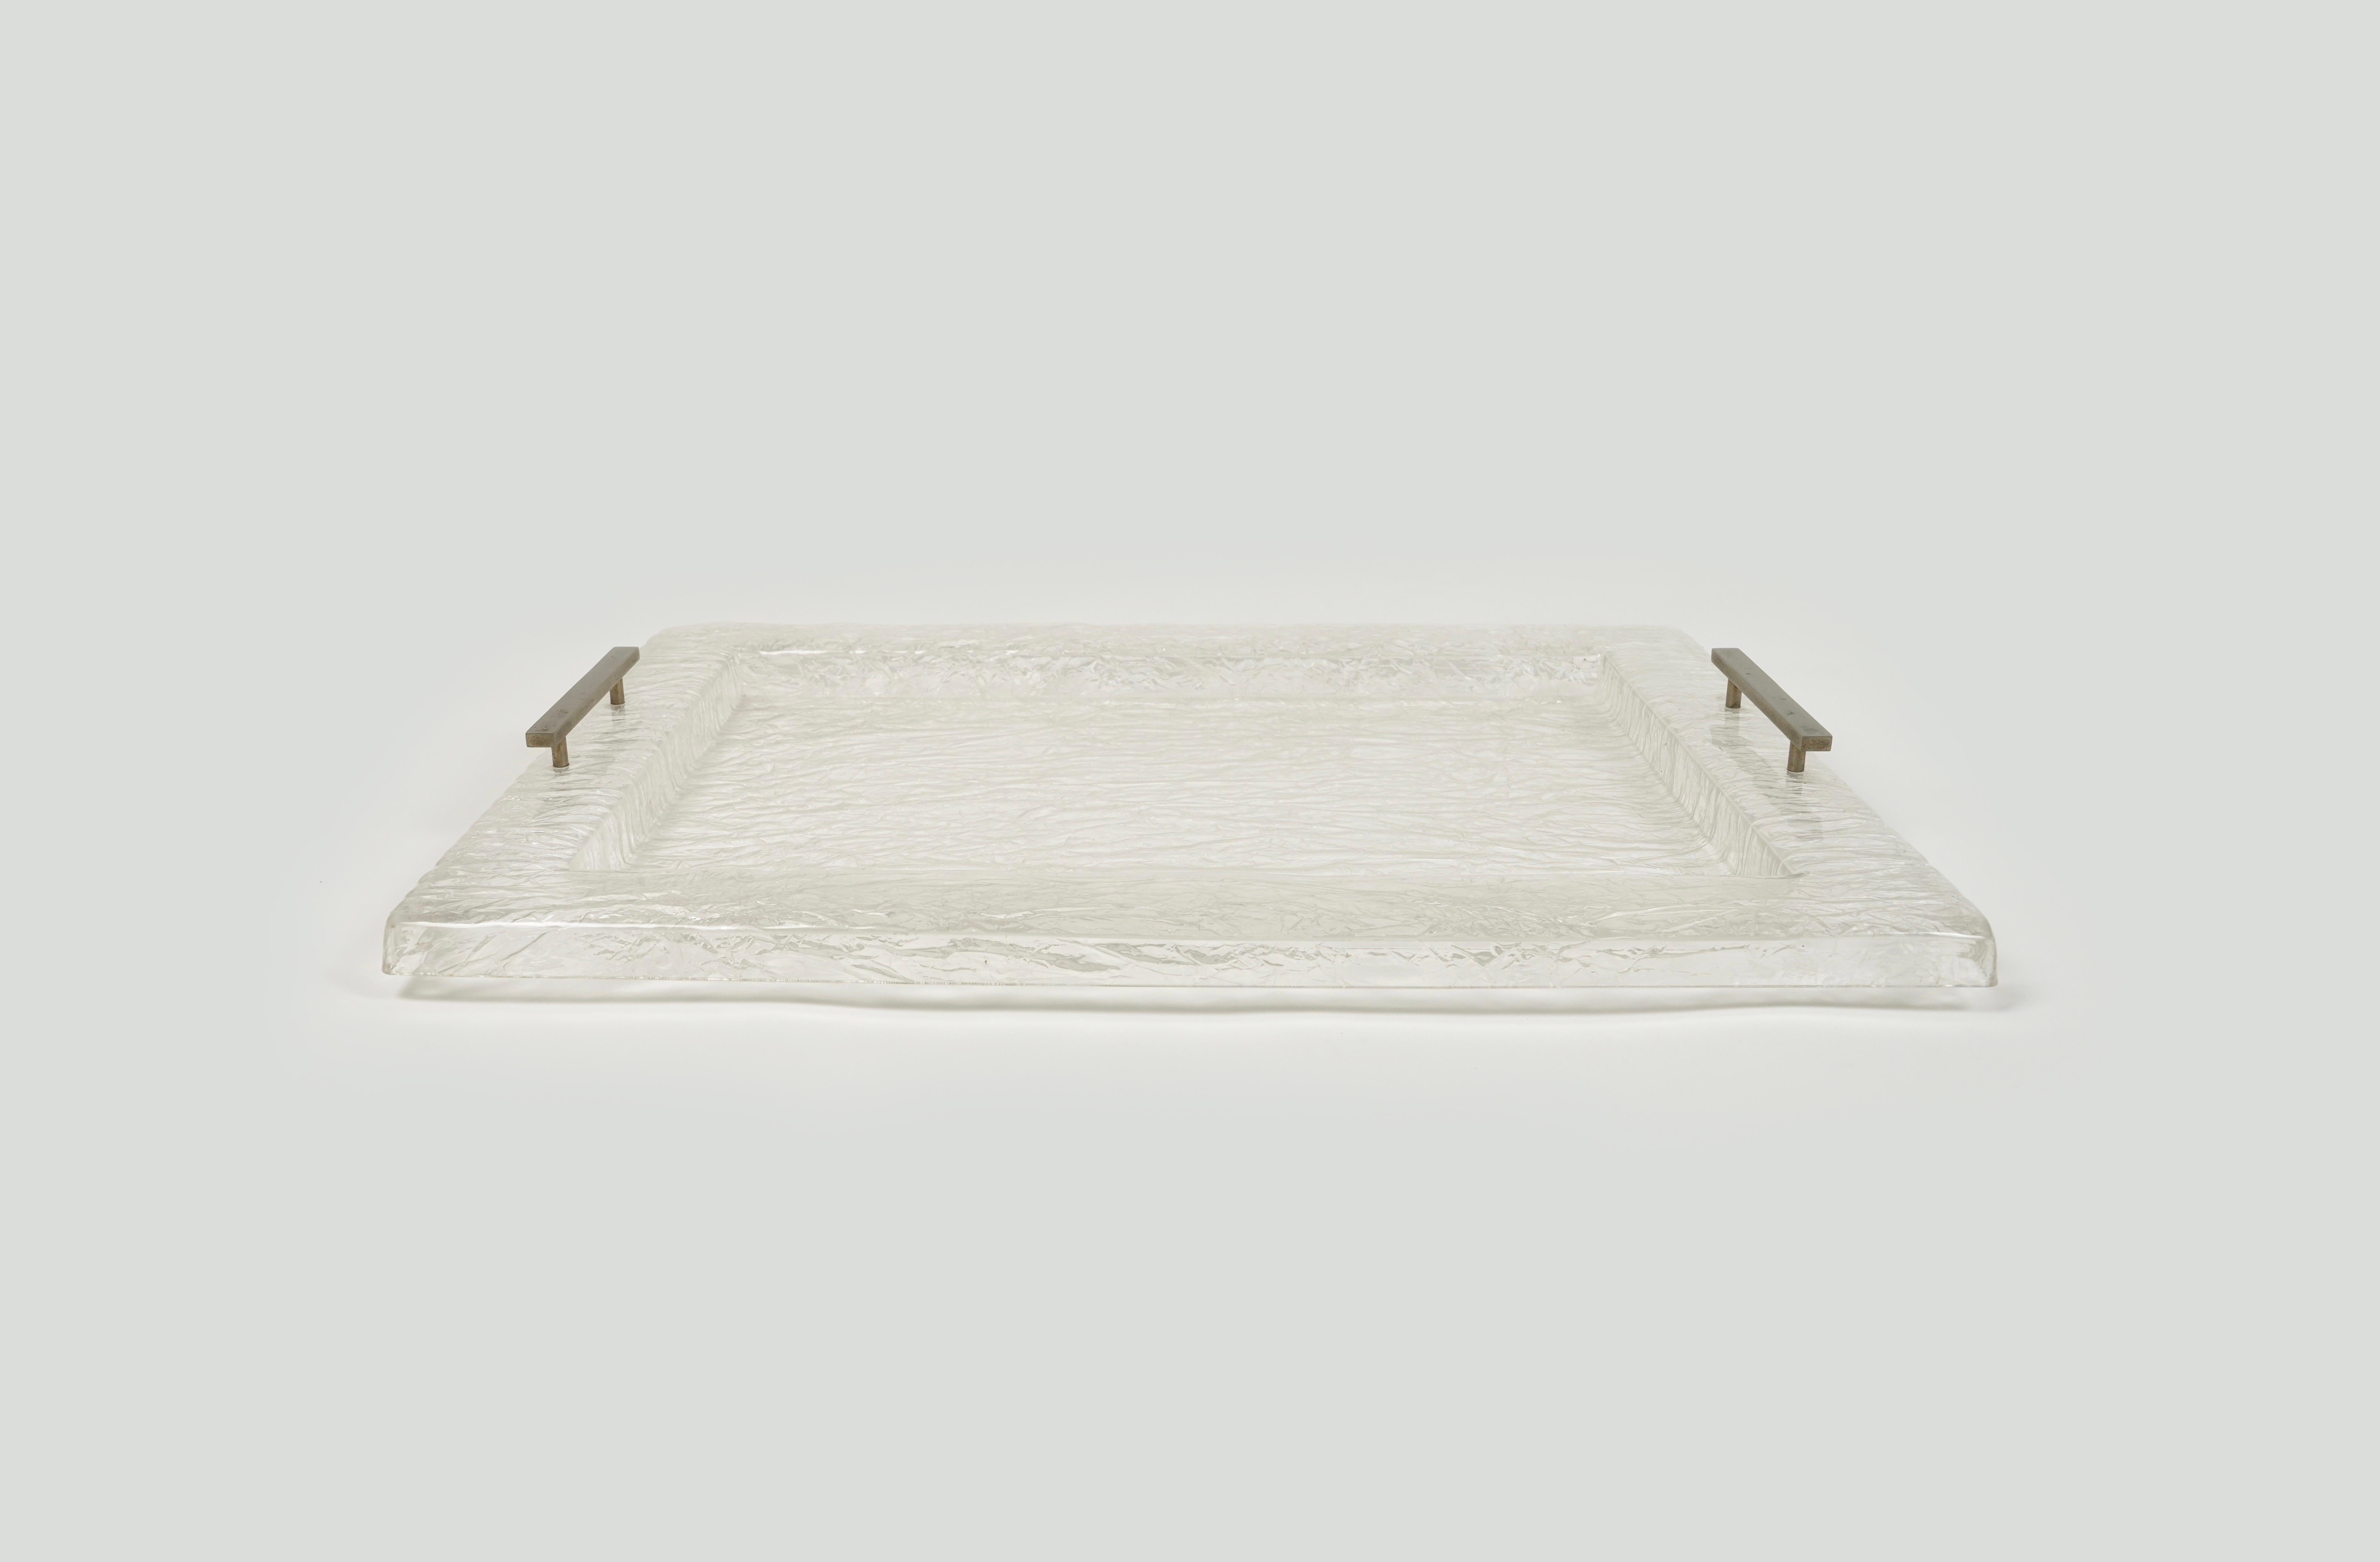 Large Rectangular Serving Tray Lucite Ice Effect Willy Rizzo Style, Italy, 1980s For Sale 2